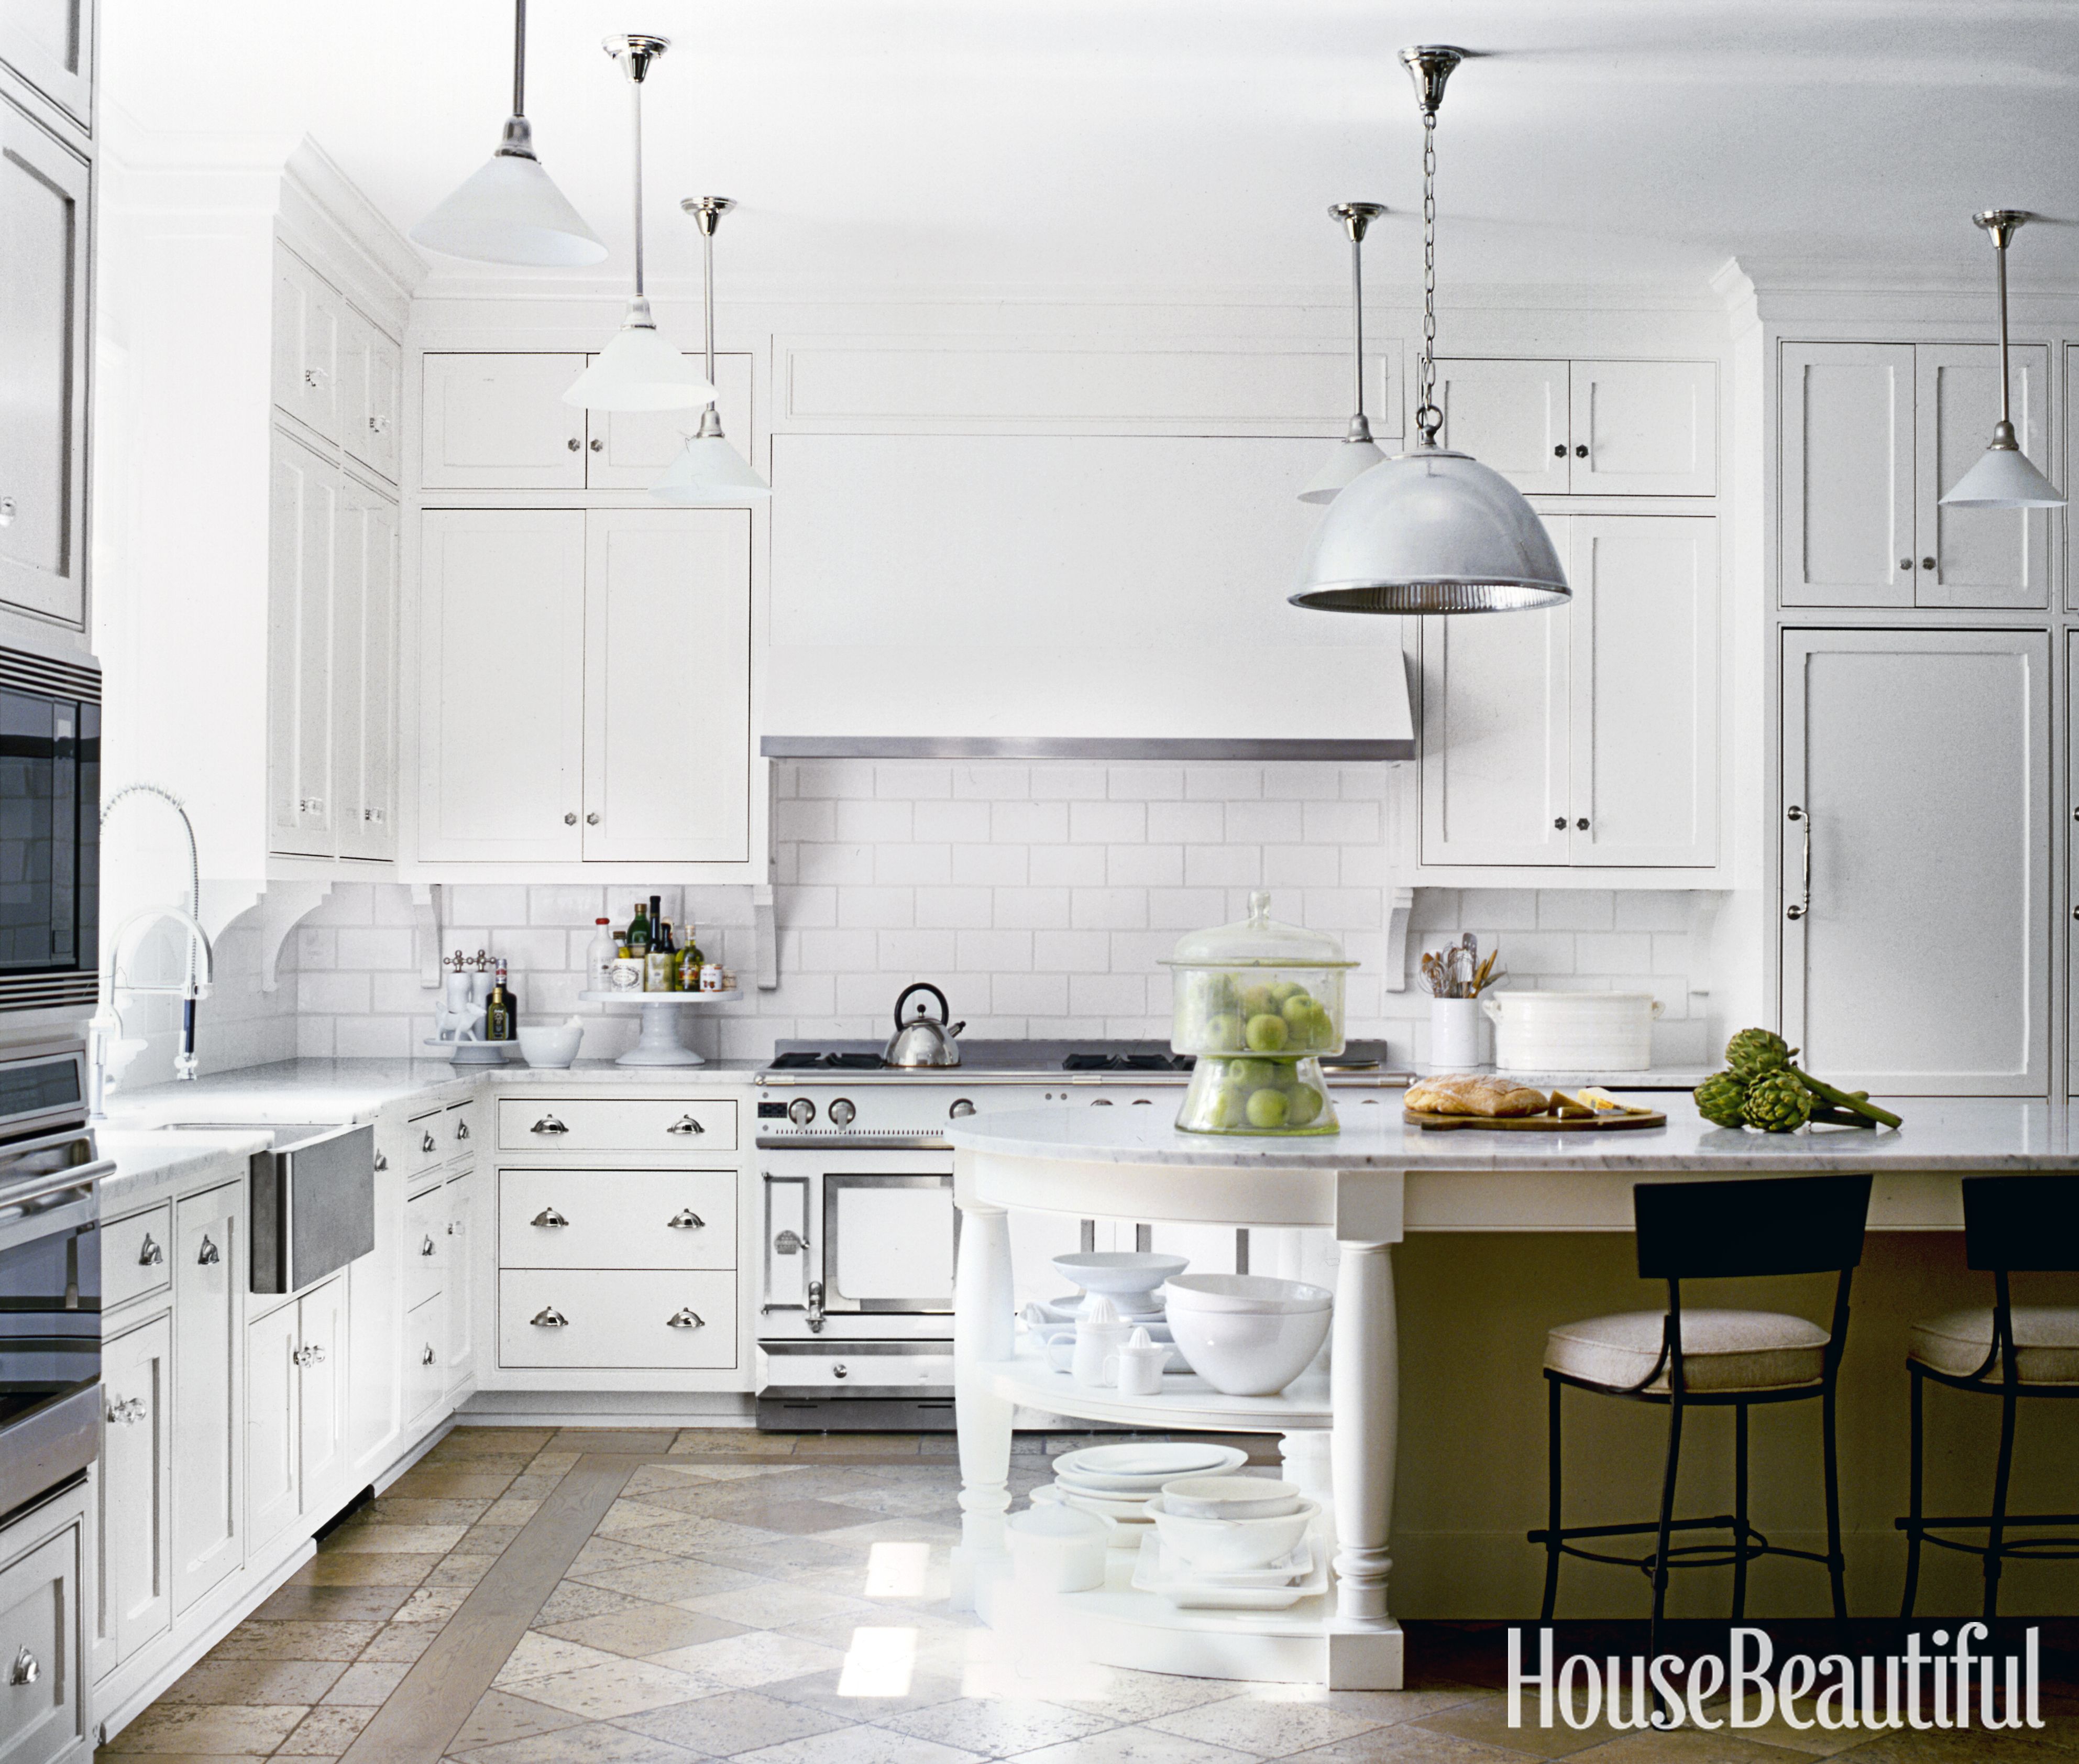 Upgrade Your Kitchen with Stylish White Appliances